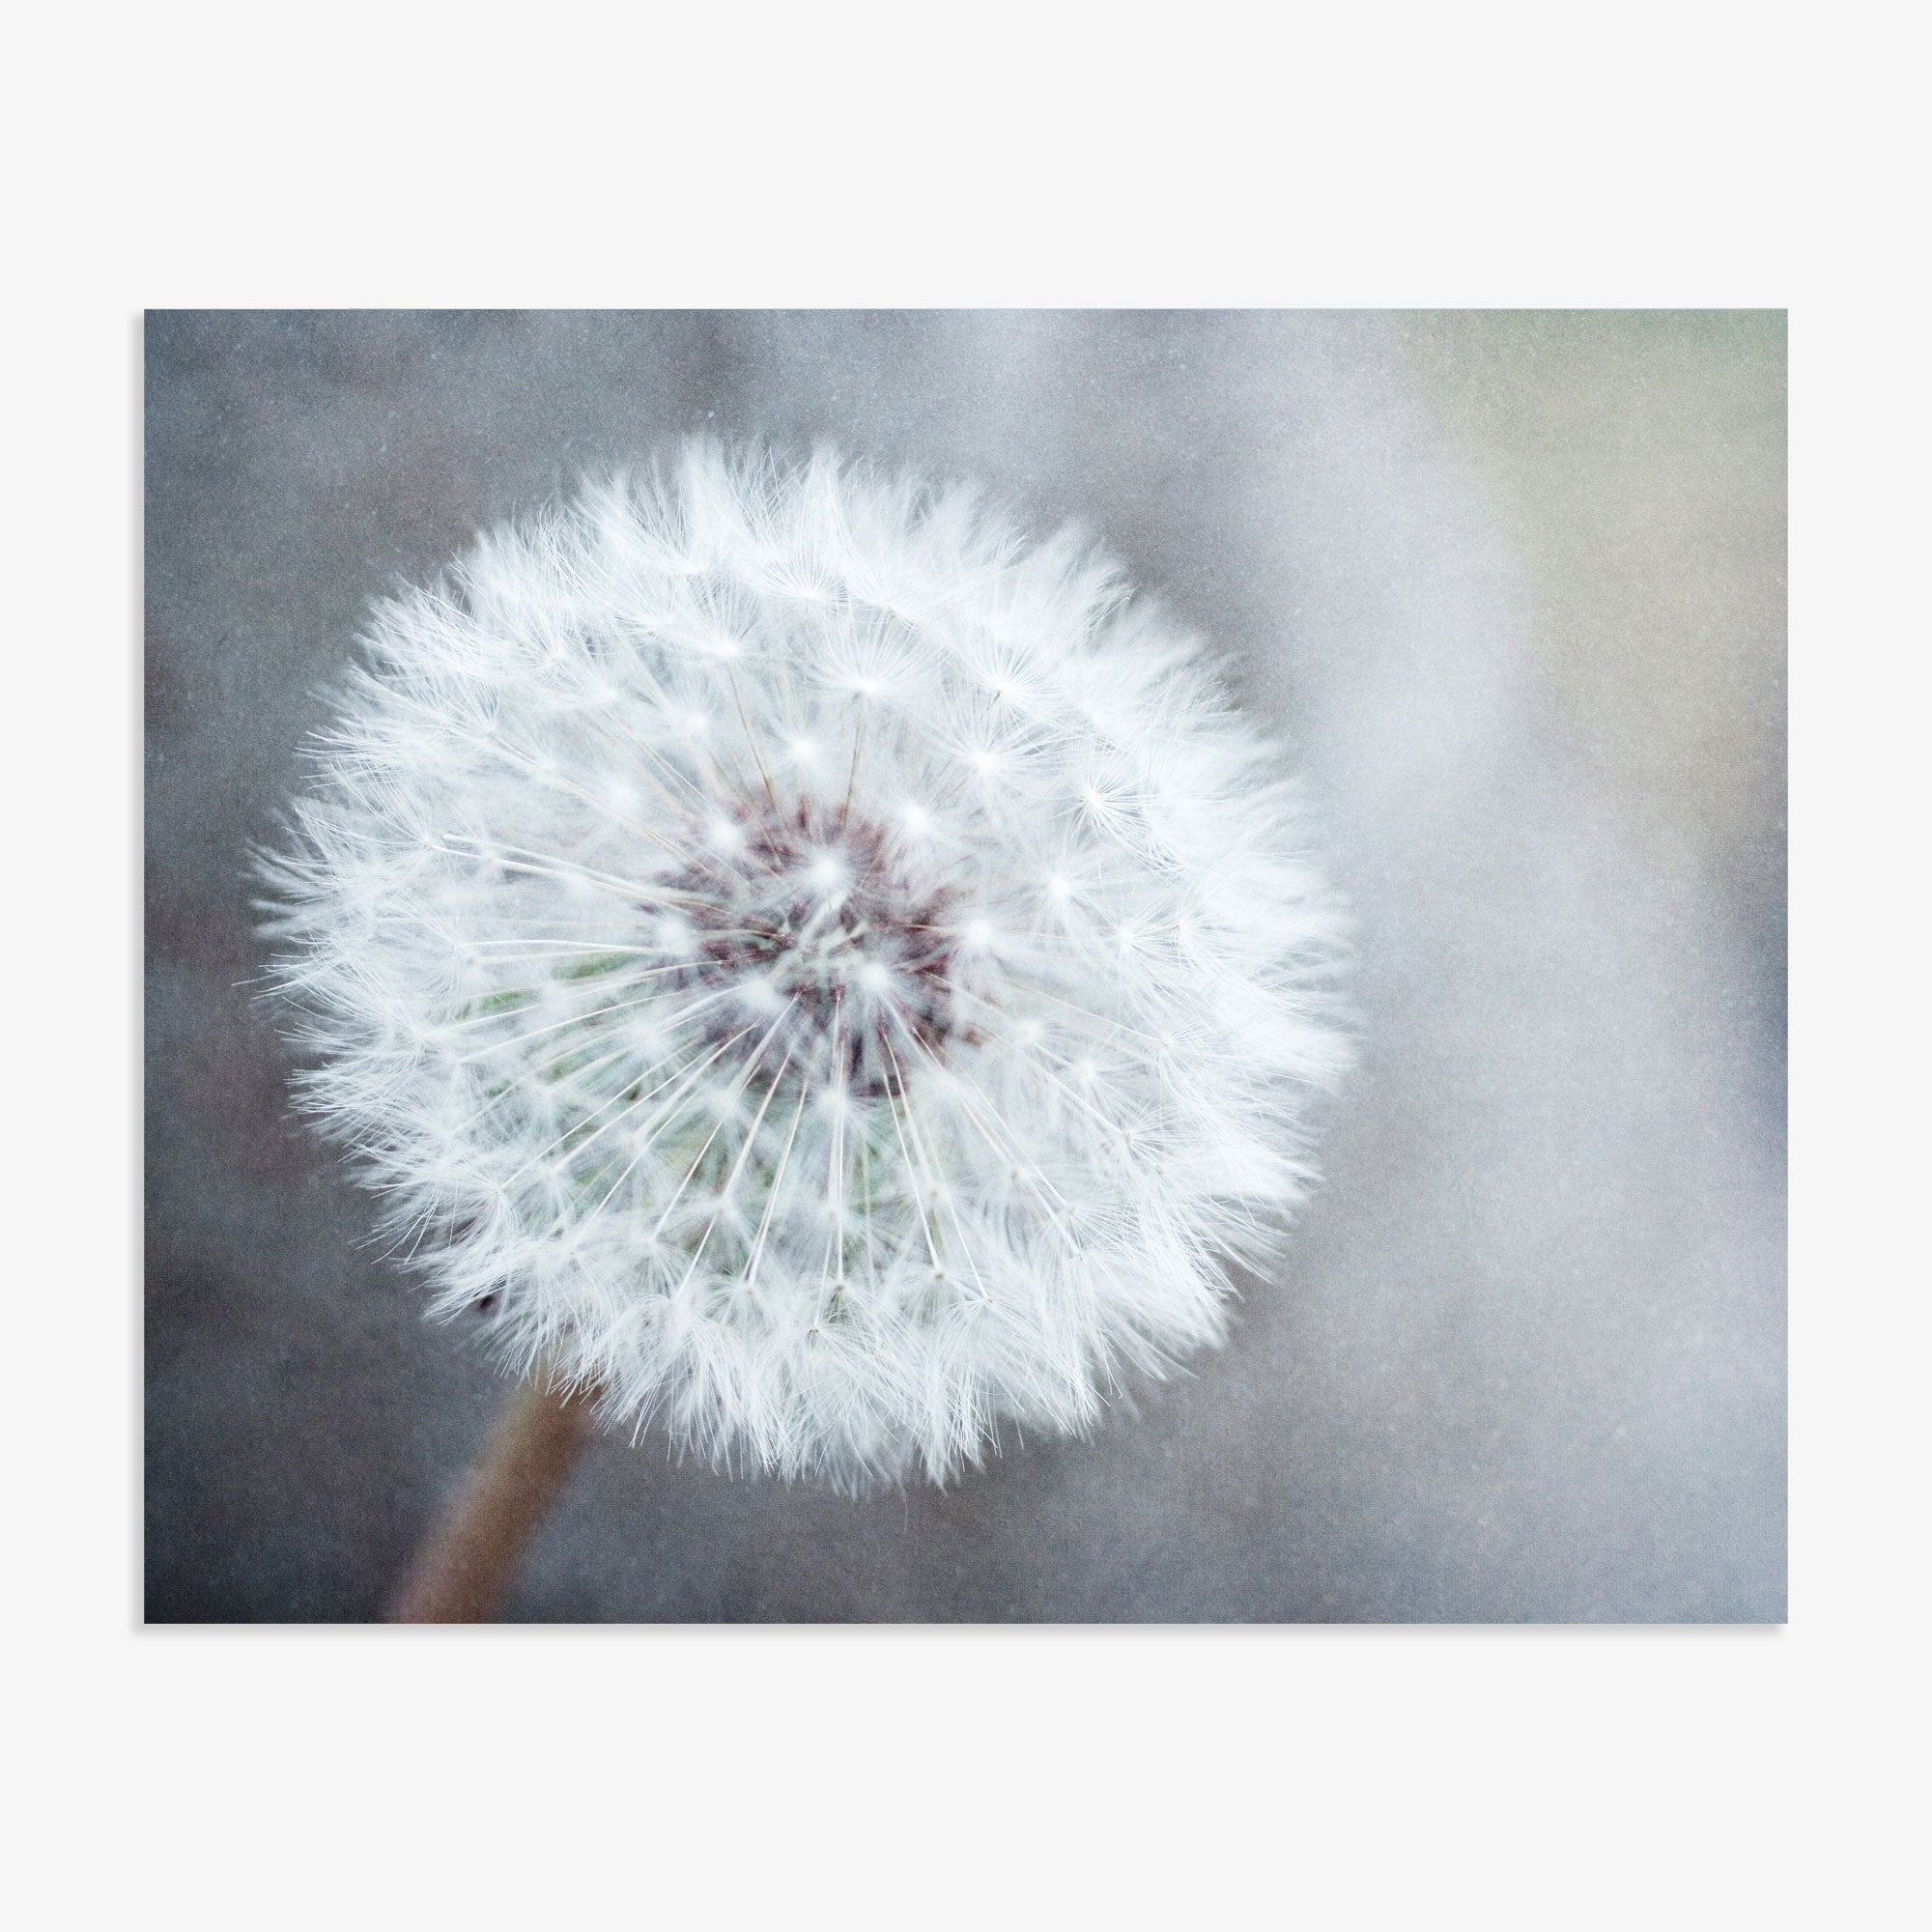 A close-up image of a delicate dandelion seed head, printed on archival photographic paper, displaying its intricate white fluff against a soft, textured Offley Green Neutral Grey Floral Print background.